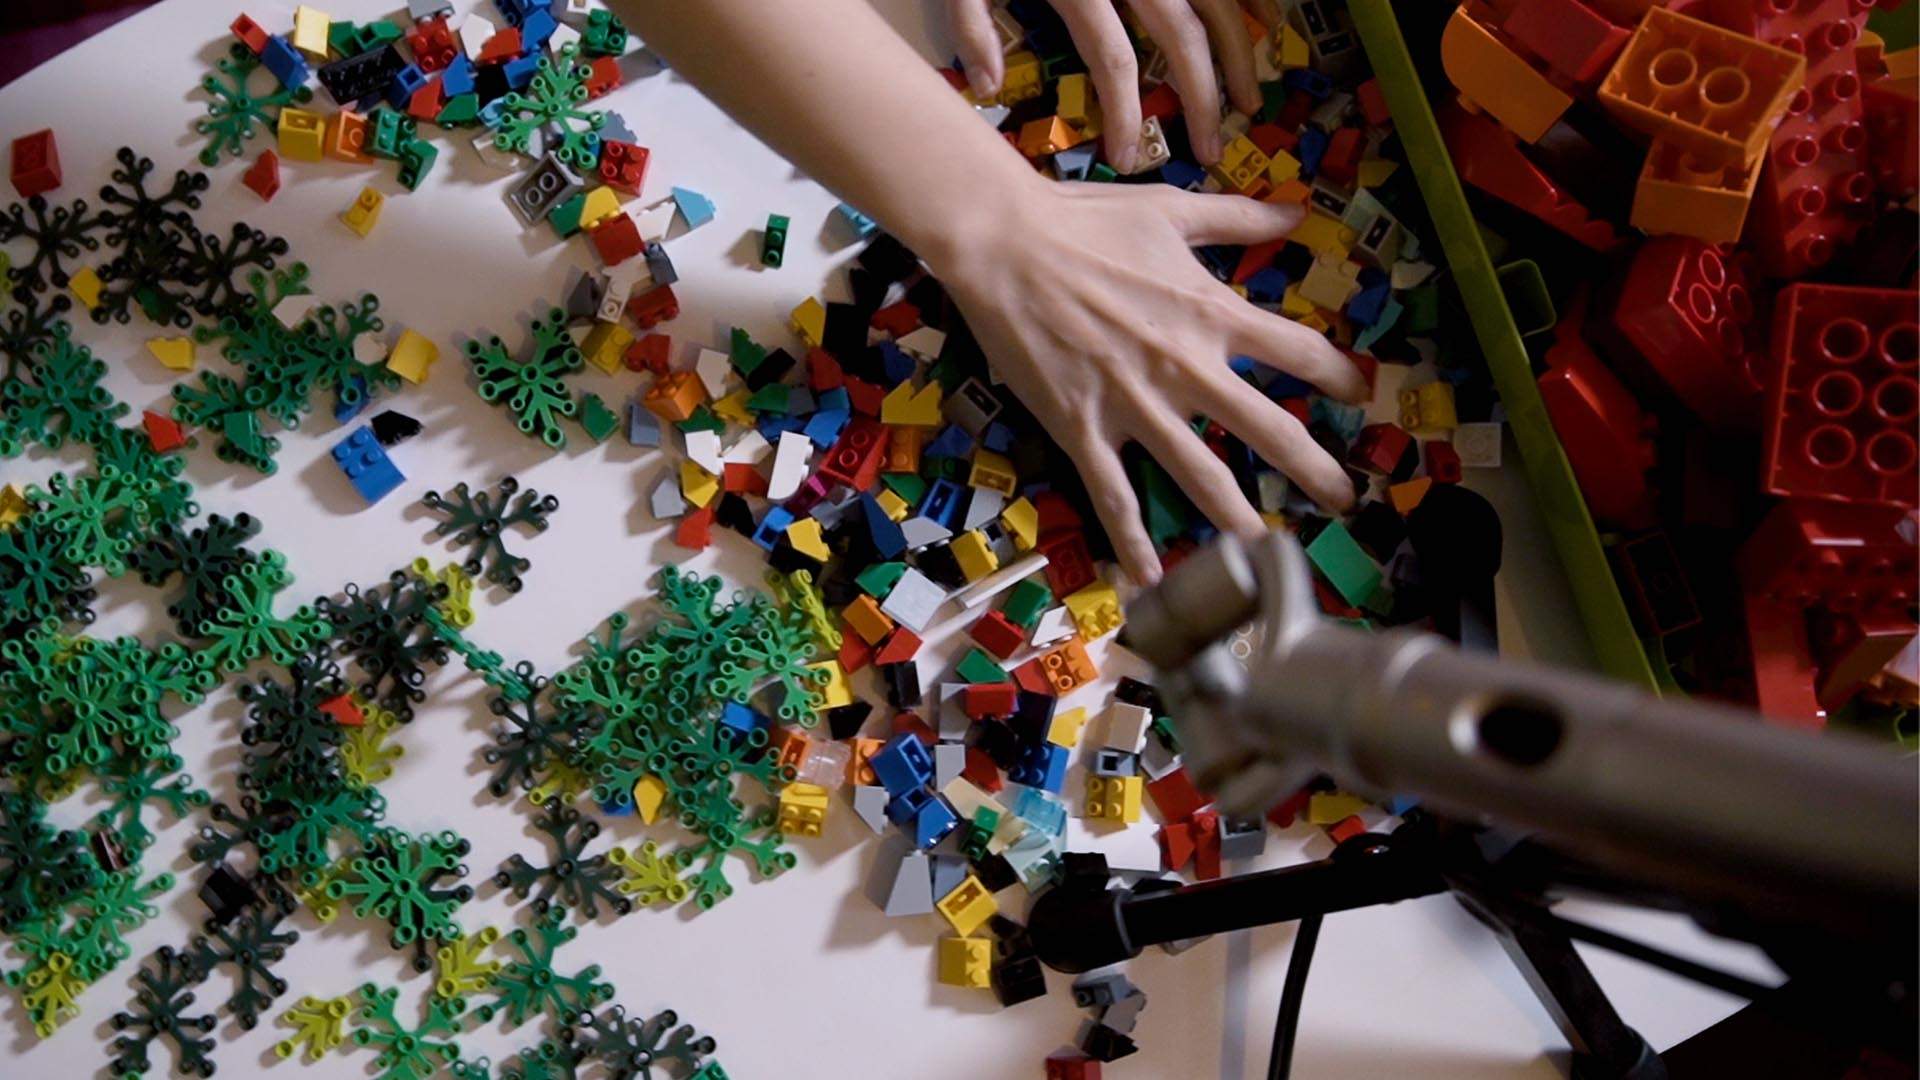 You Can Now Meditate to the Soothing Sounds of More Than 10,000 Lego Bricks Jumbled Together